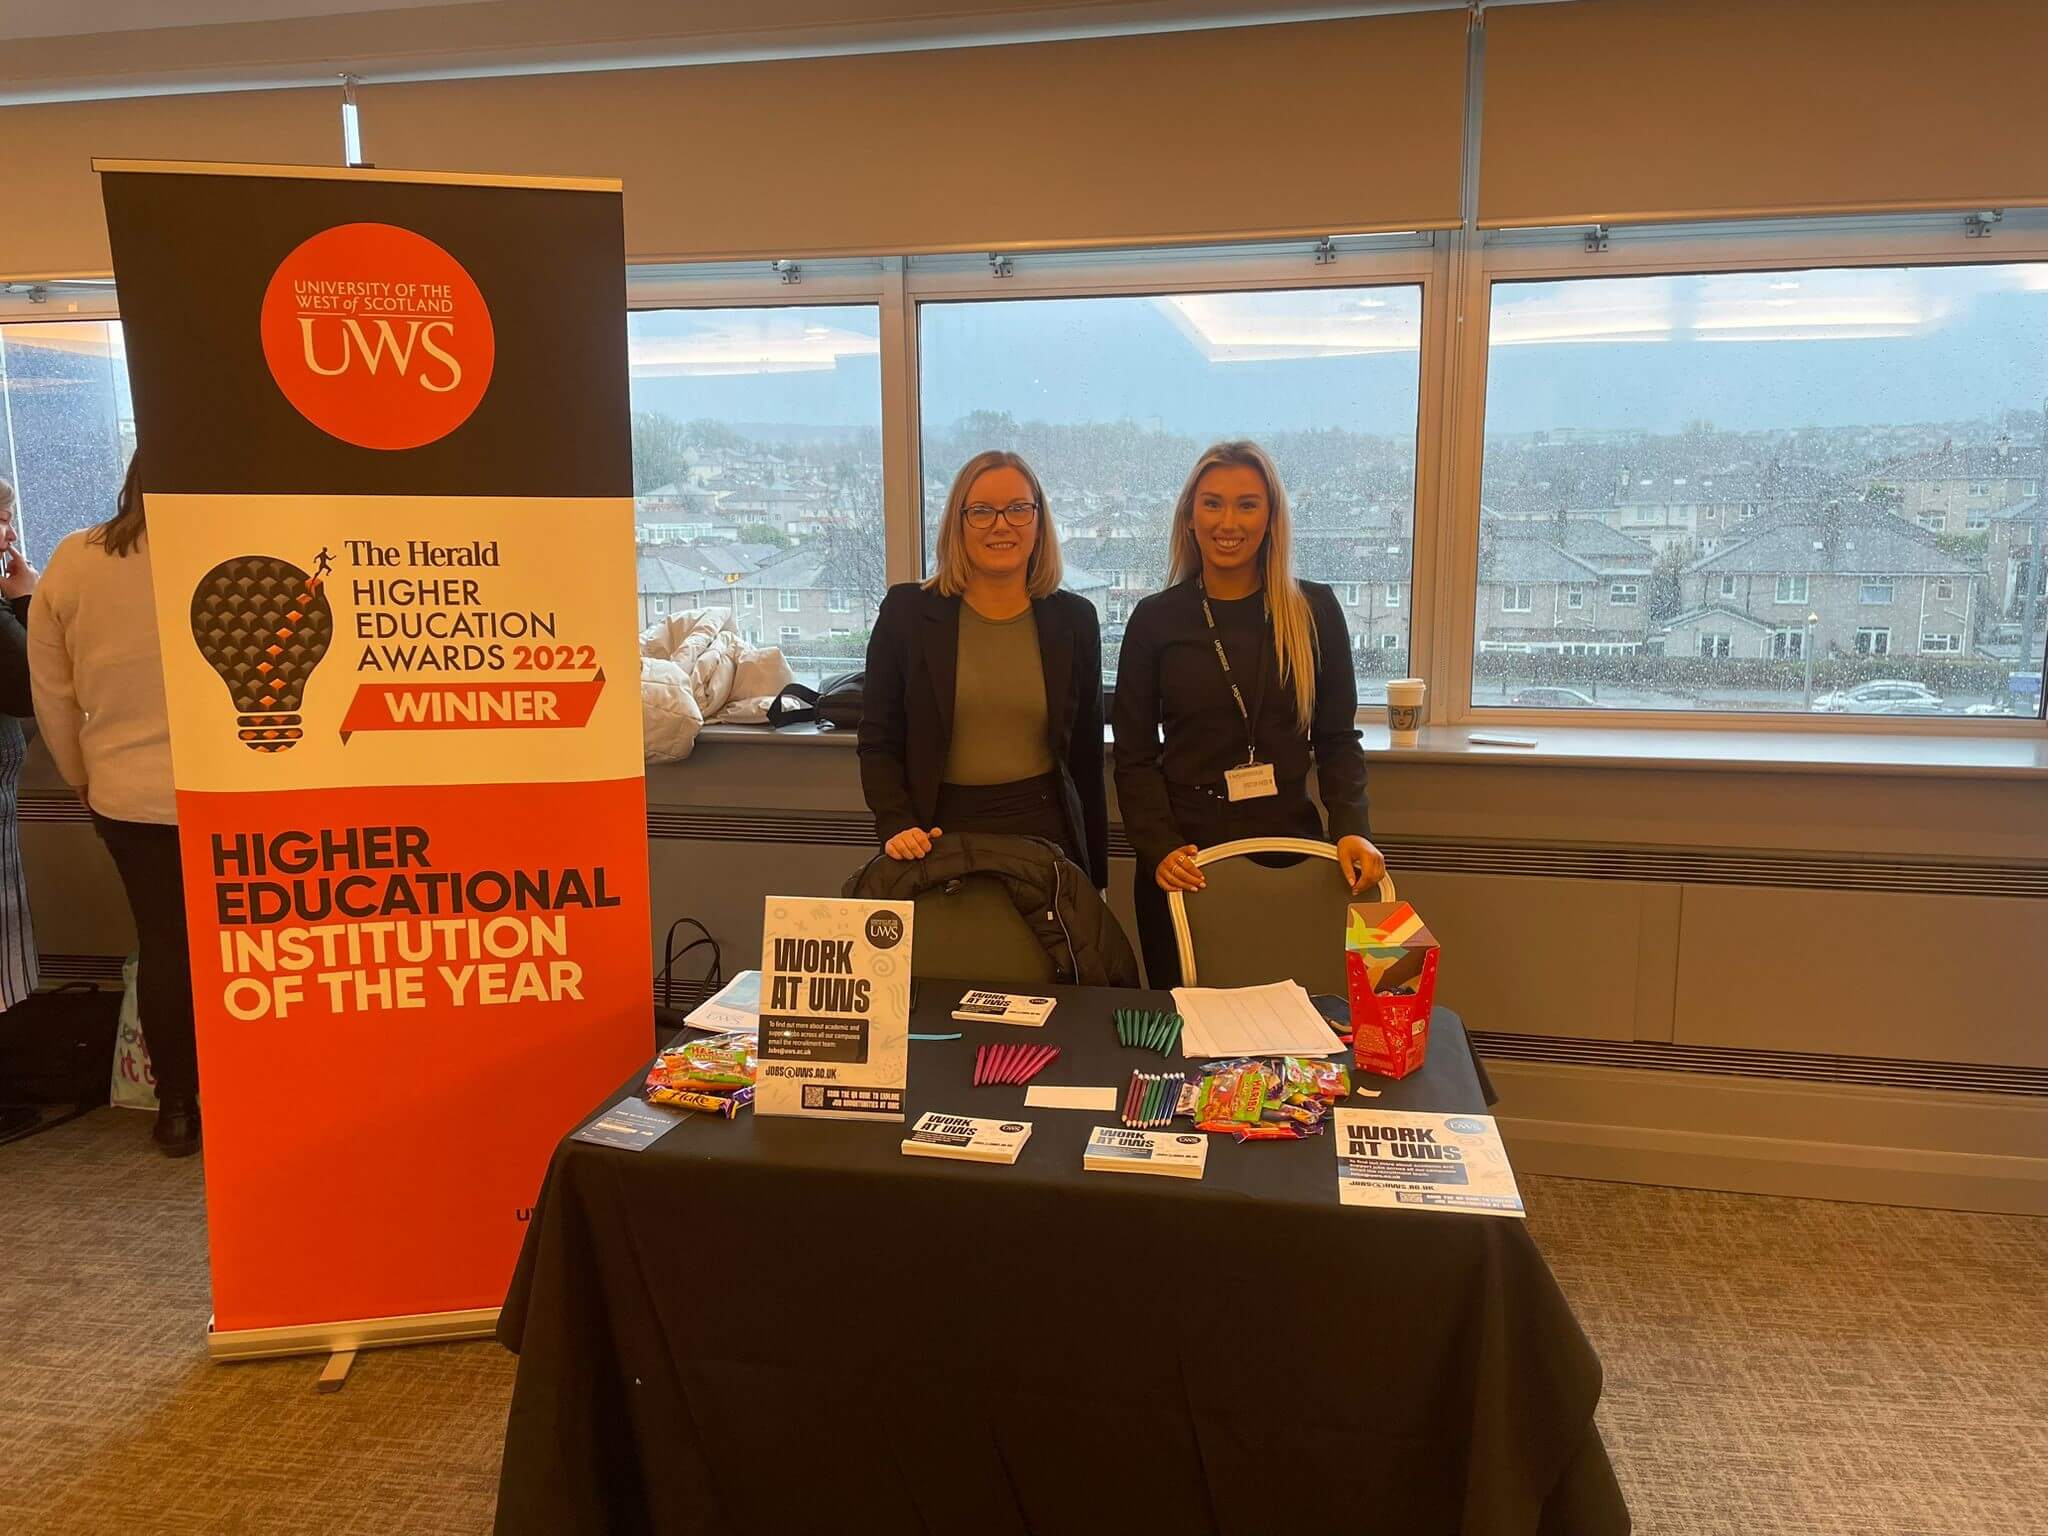 University of West Scotland at our event in Glasgow